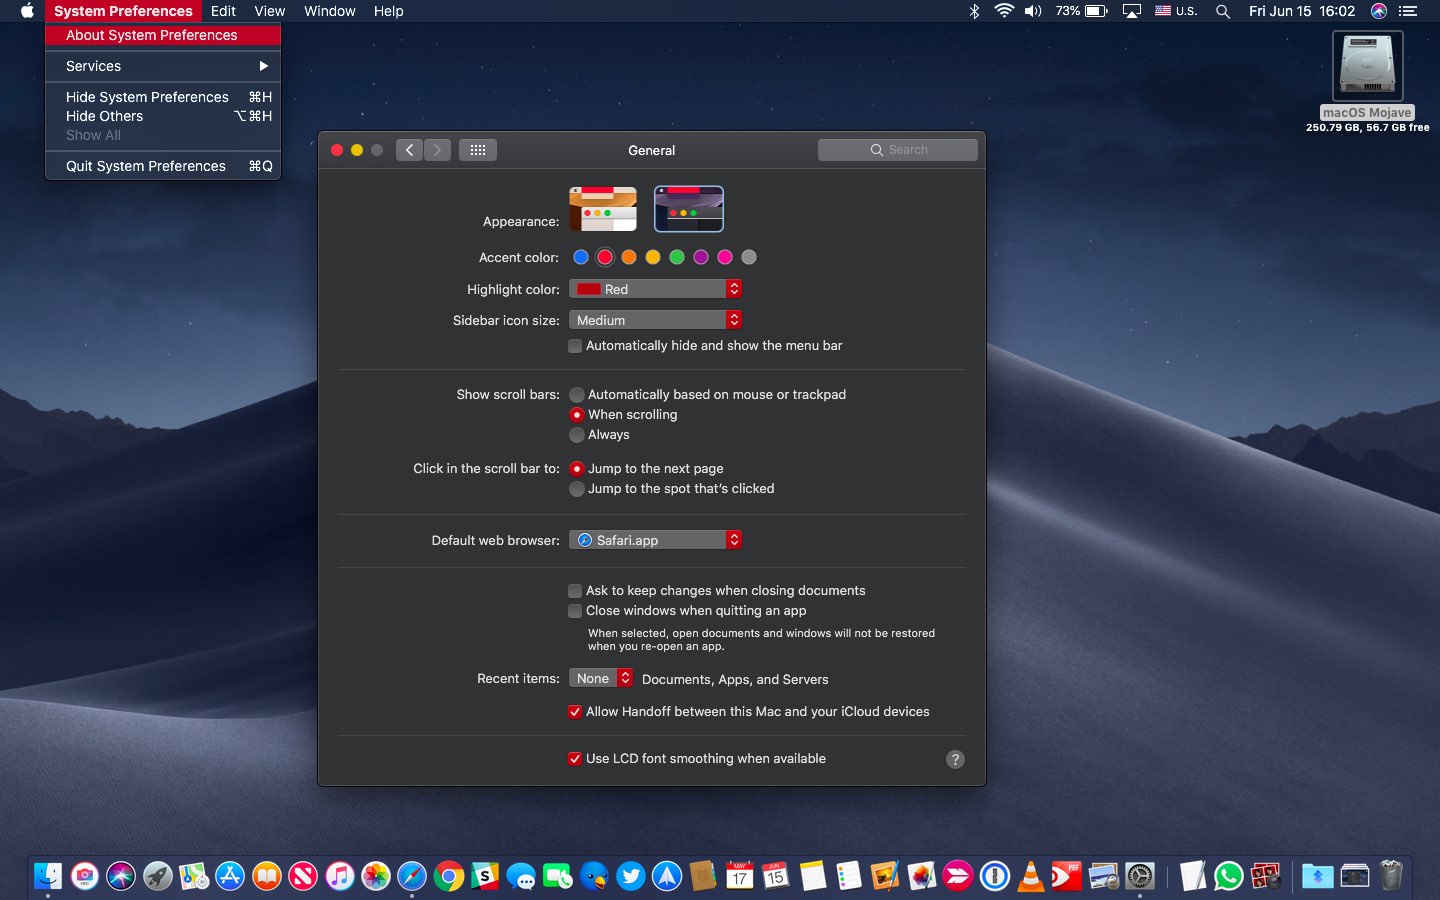 macOS Mojave Dark Mode with the red accent and highlight color